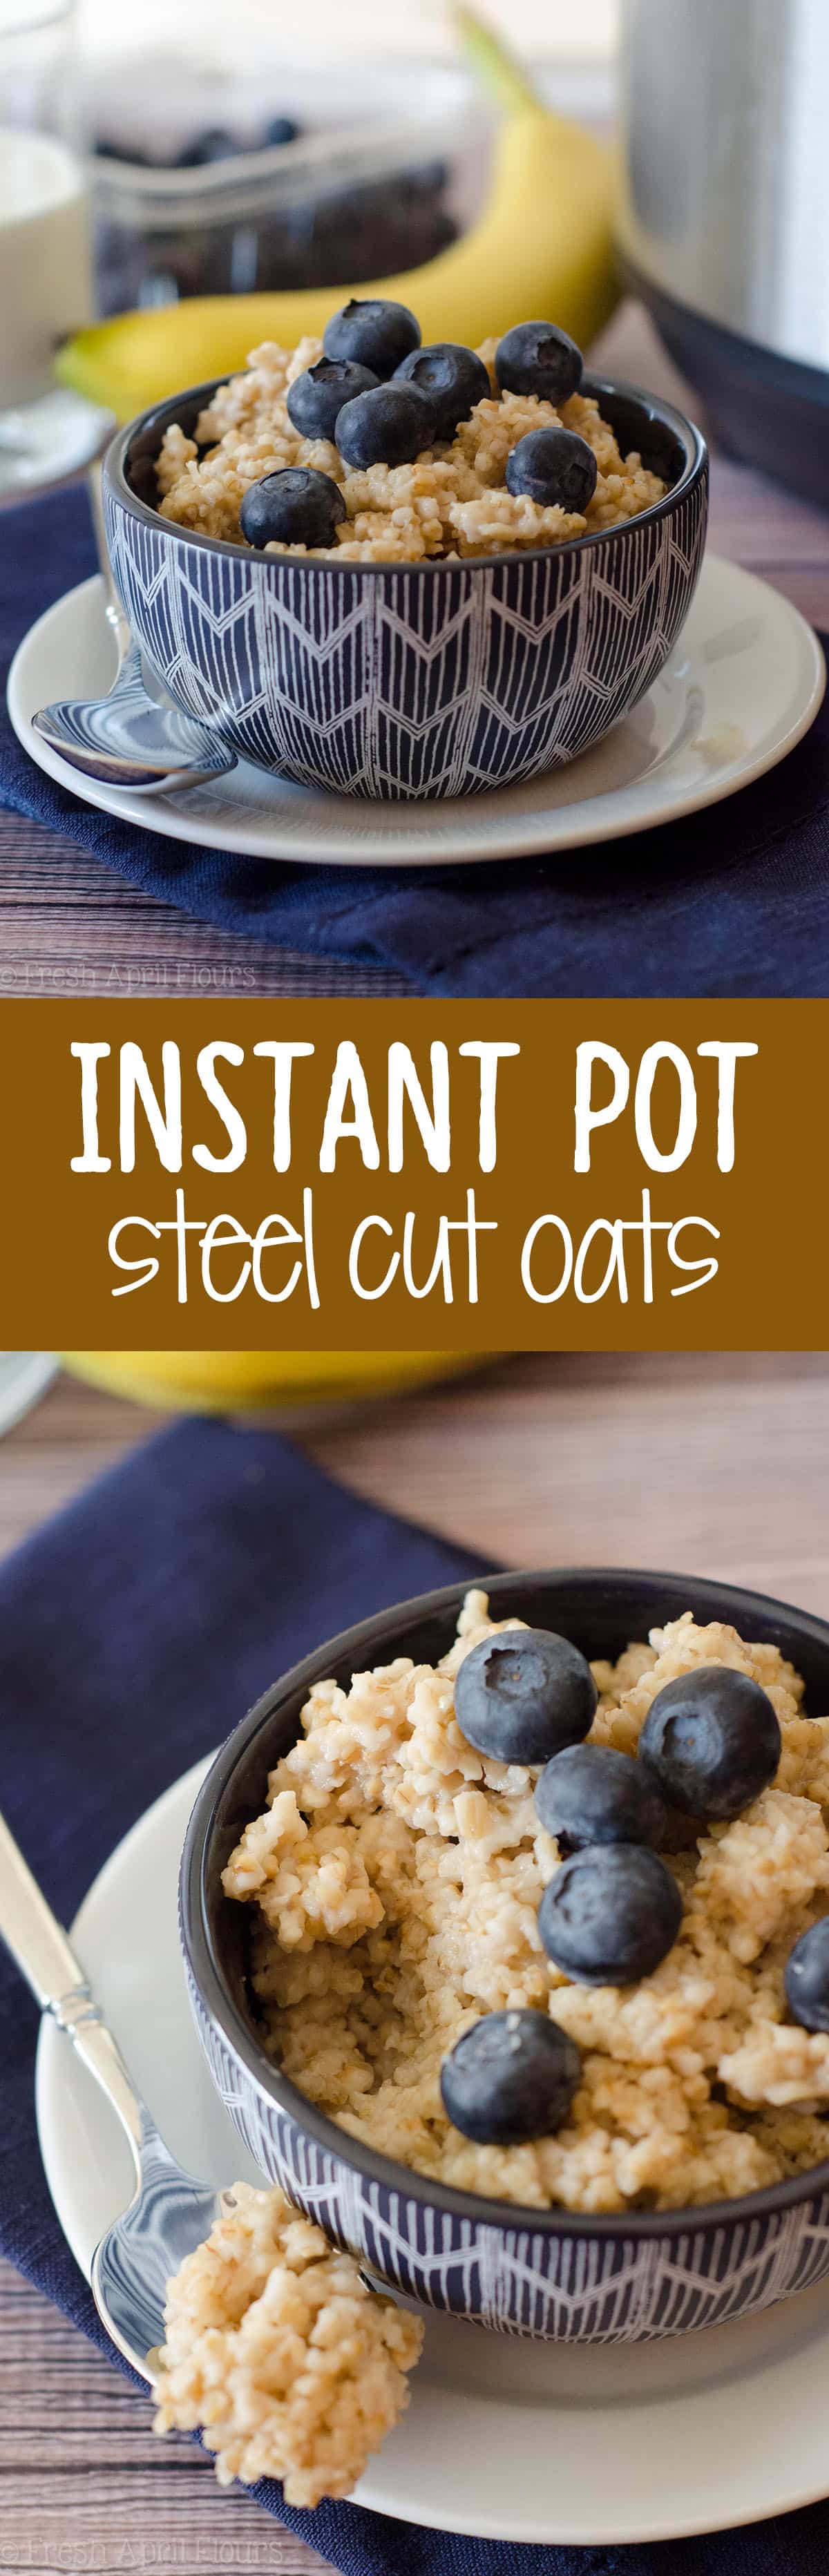 Instant Pot Steel Cut Oats: Everything you love about steel cut oats WITHOUT all the time it takes to cook them on the stove. Soft and fluffy and ready for all of your favorite add-ins! via @frshaprilflours